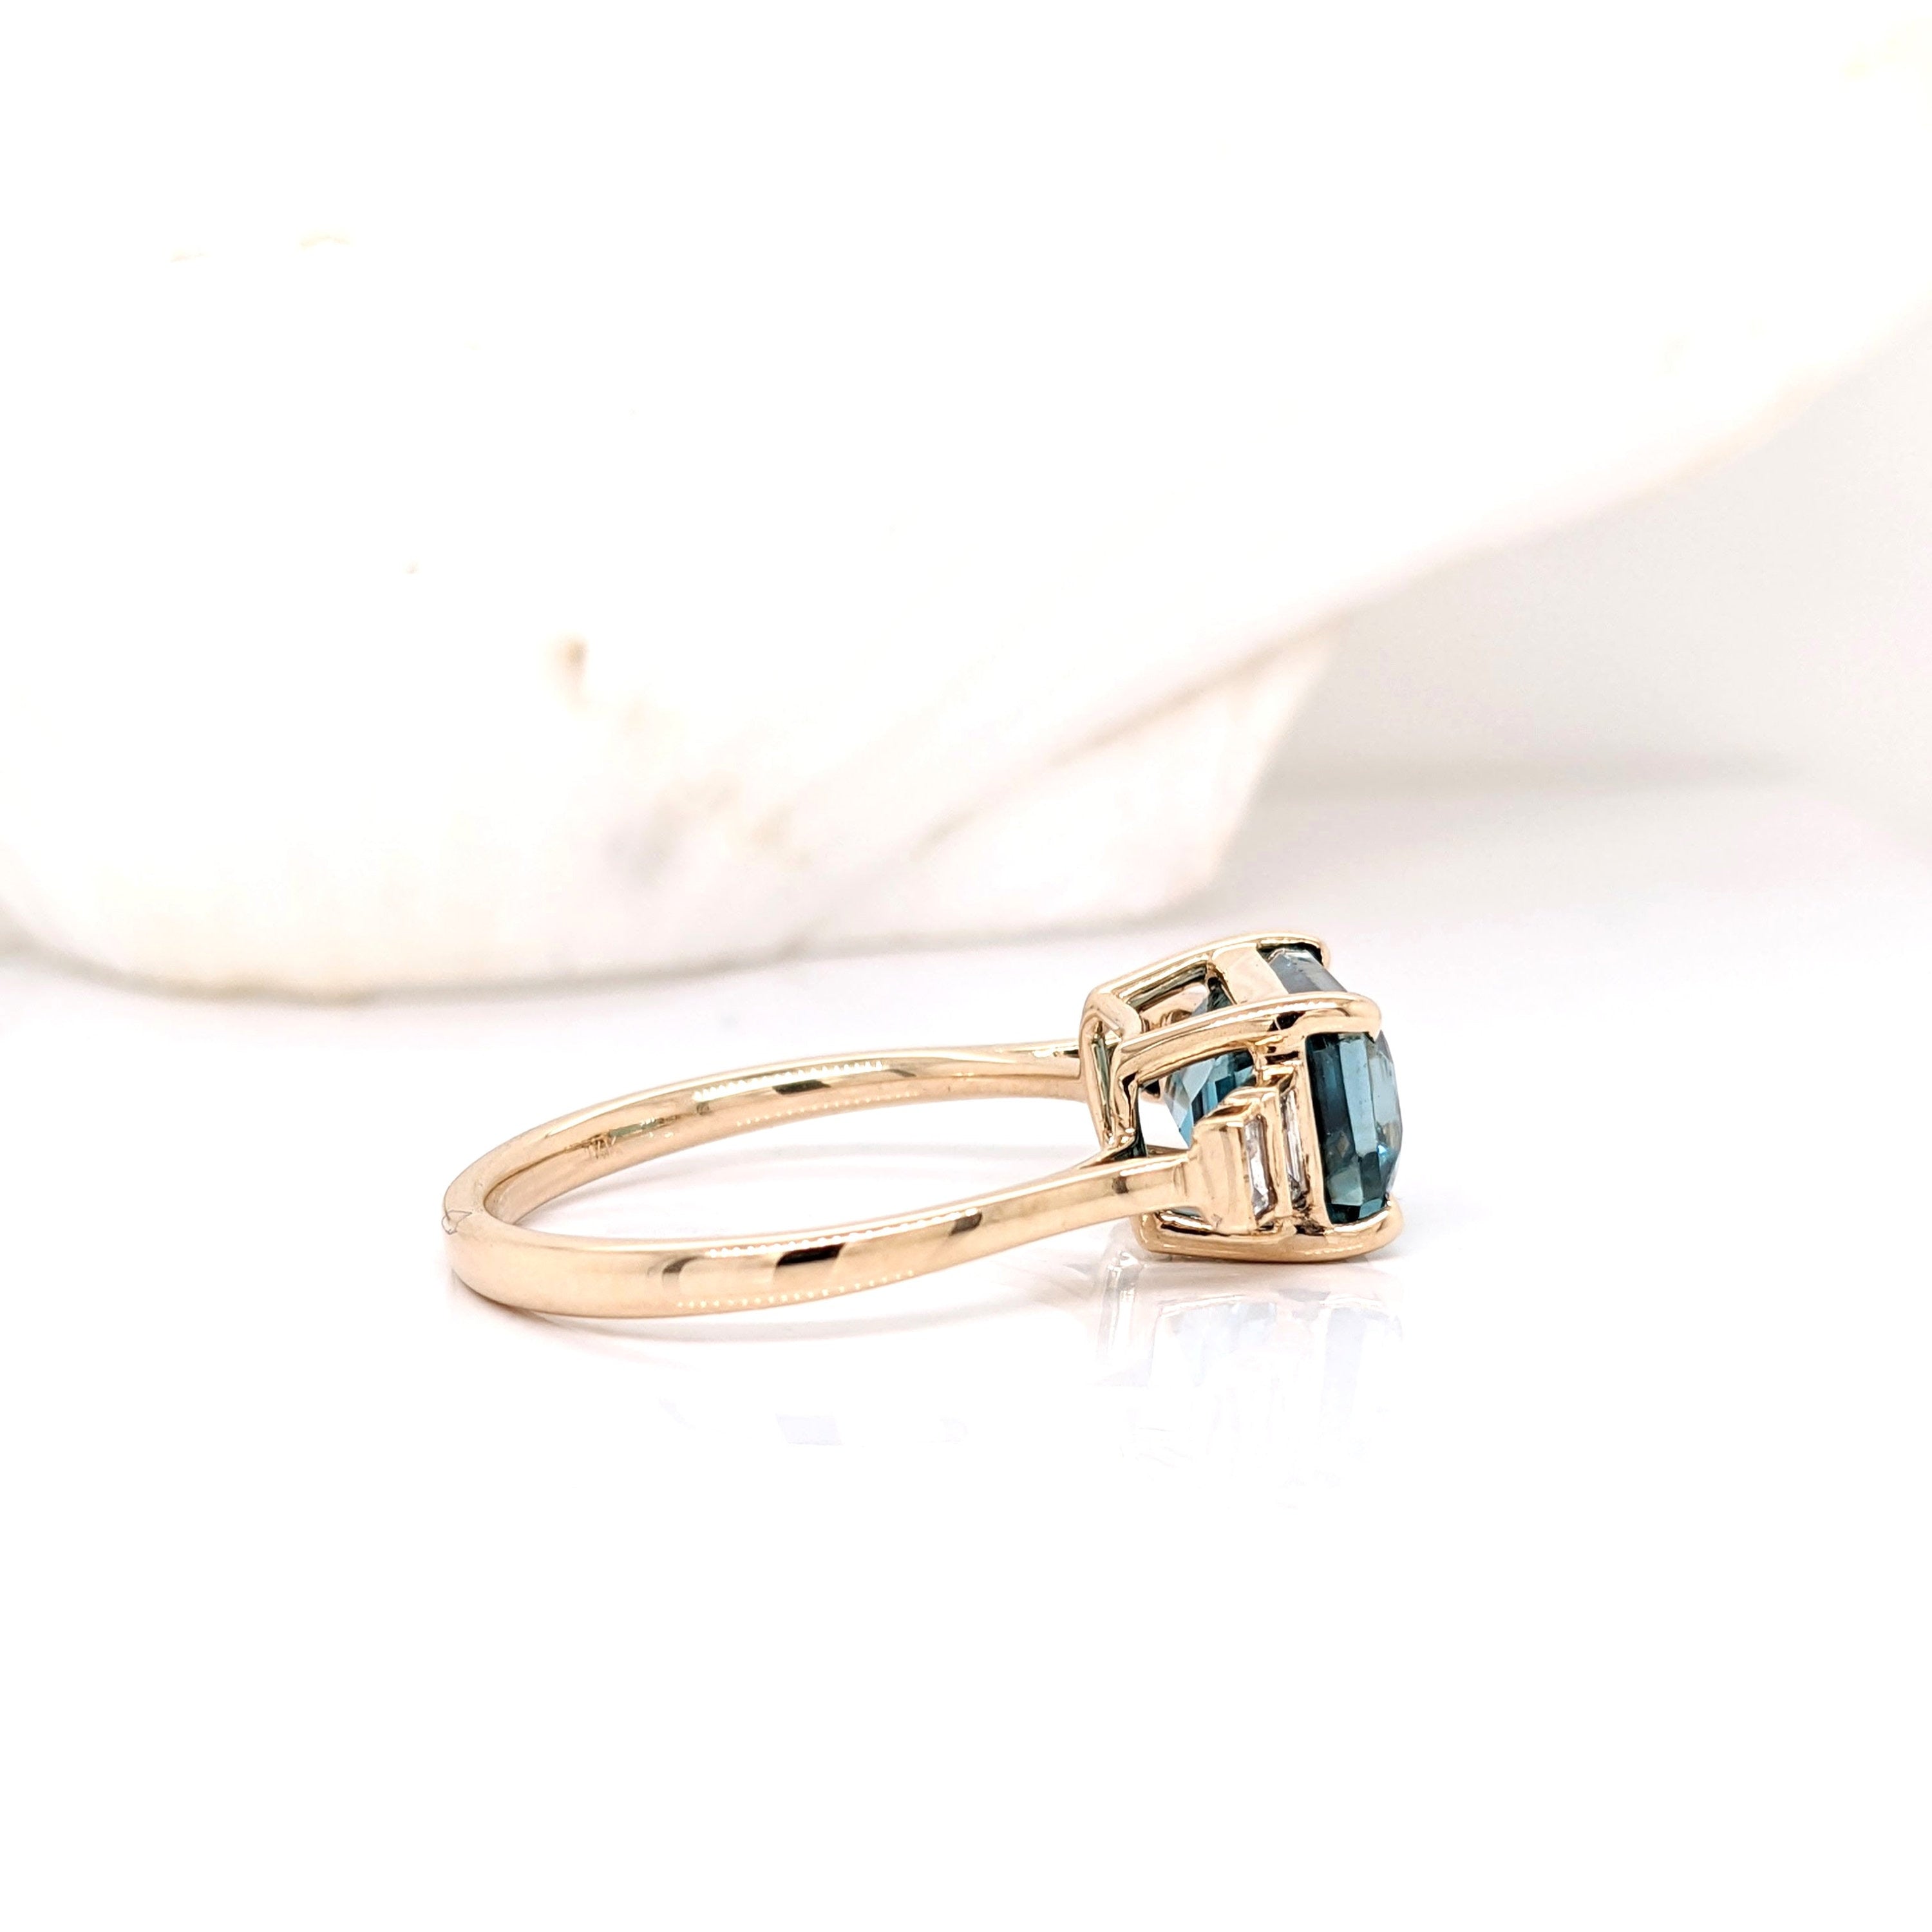 East West Blue Zircon Ring w Baguette Diamond Accents in Solid 14K Yellow Gold | Emerald Cut 9x6.5mm | Statement Ring